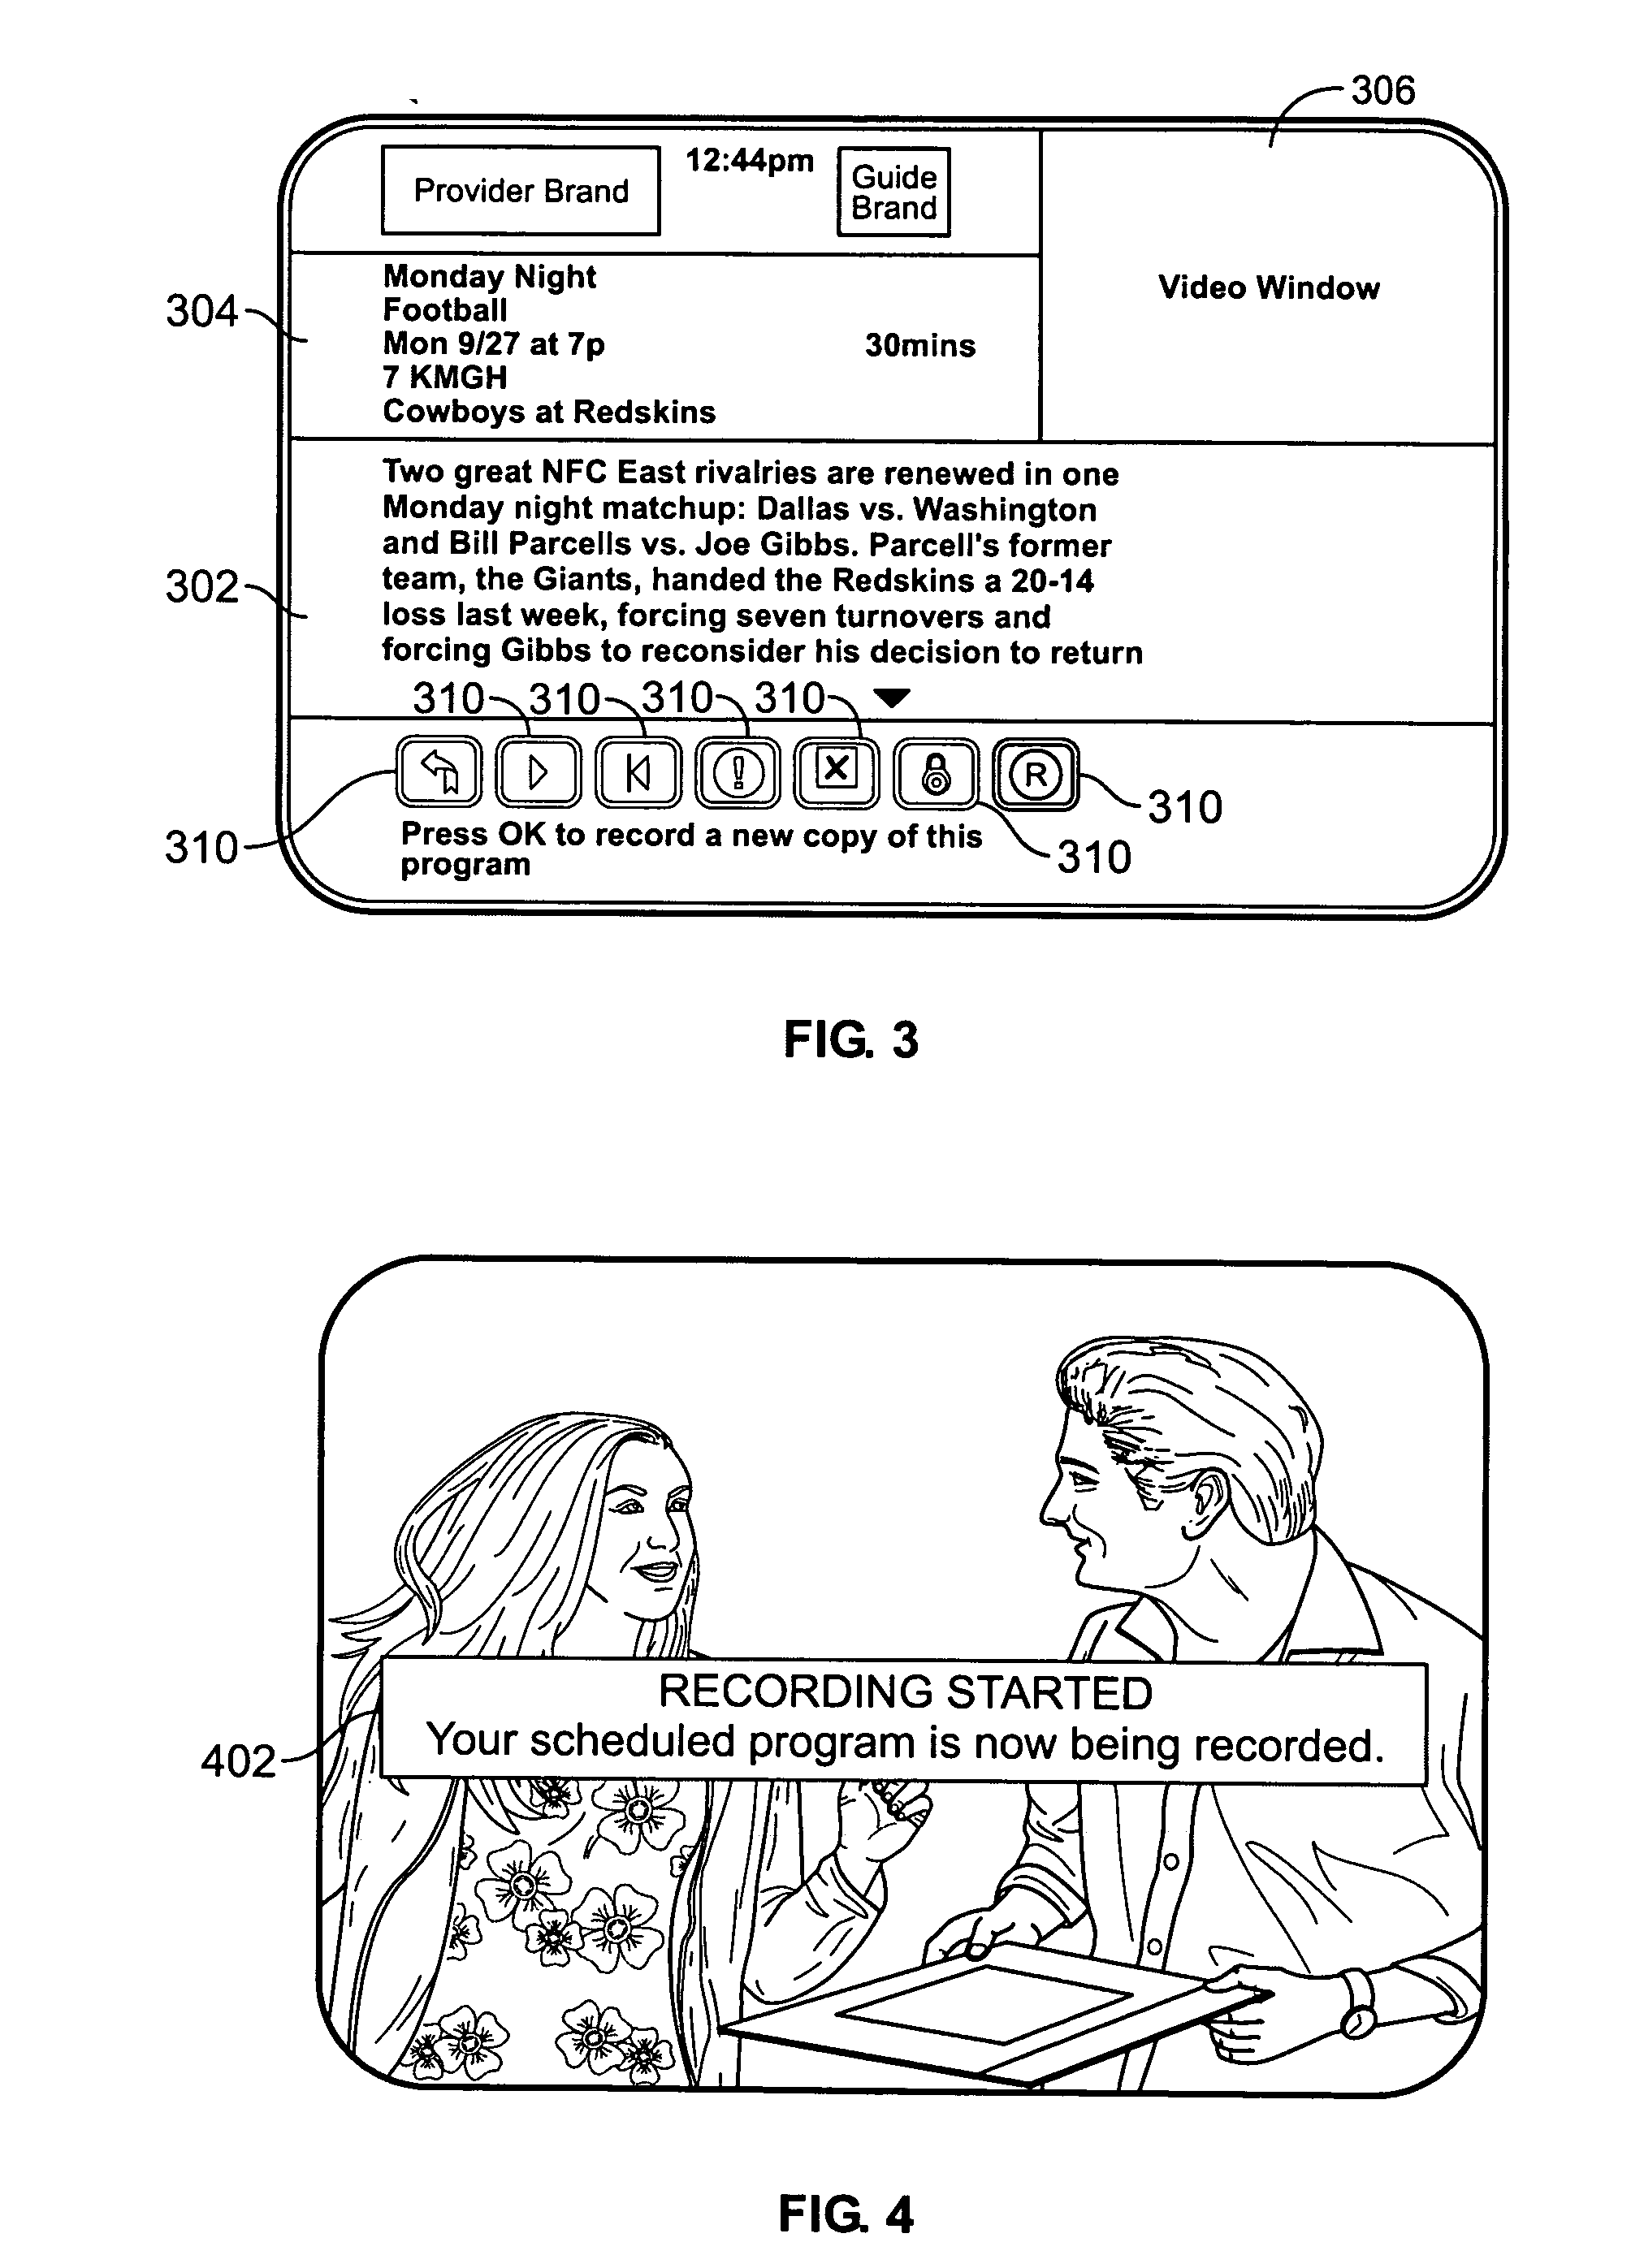 Systems and methods for recording programs using a network recording device as supplemental storage